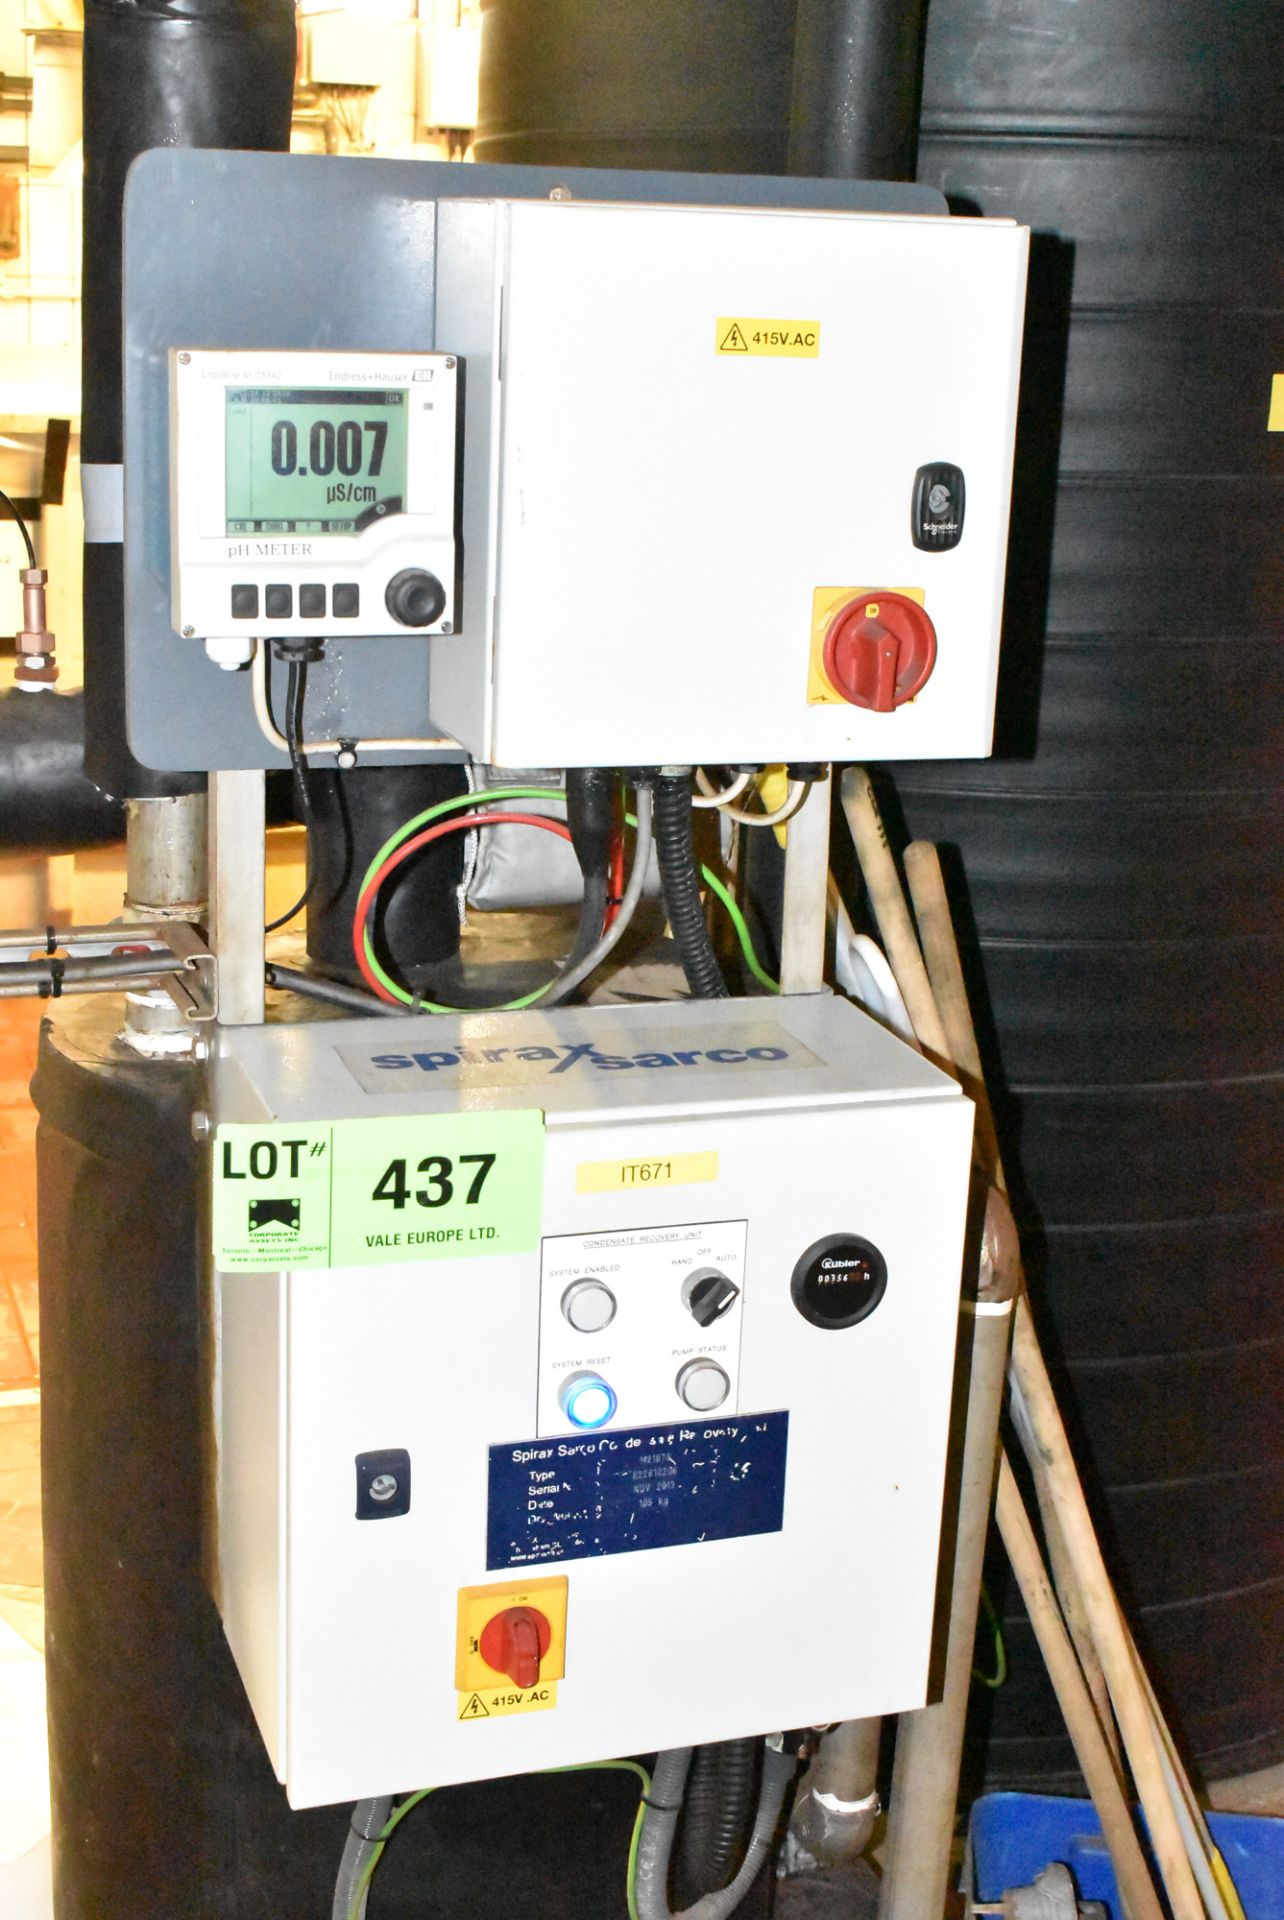 SPIRAX SARCO (2013) M2107S CONDENSATE RECOVERY SYSTEM WITH ENDRESS & HAUSER LIQUILINE M CM42 DIGITAL